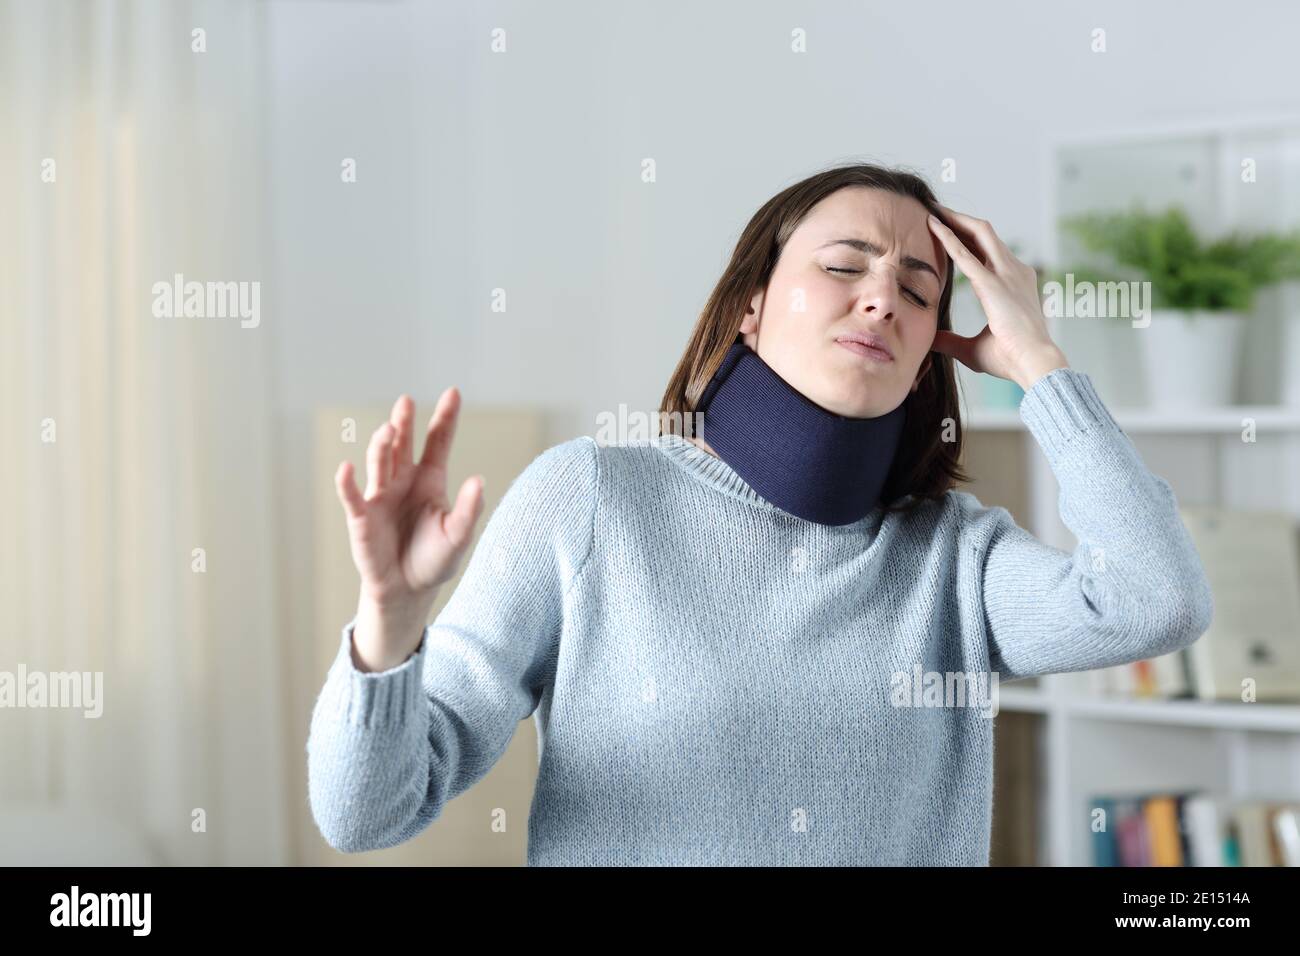 Dizzy woman wearing neck brace suffering standing at home Stock Photo